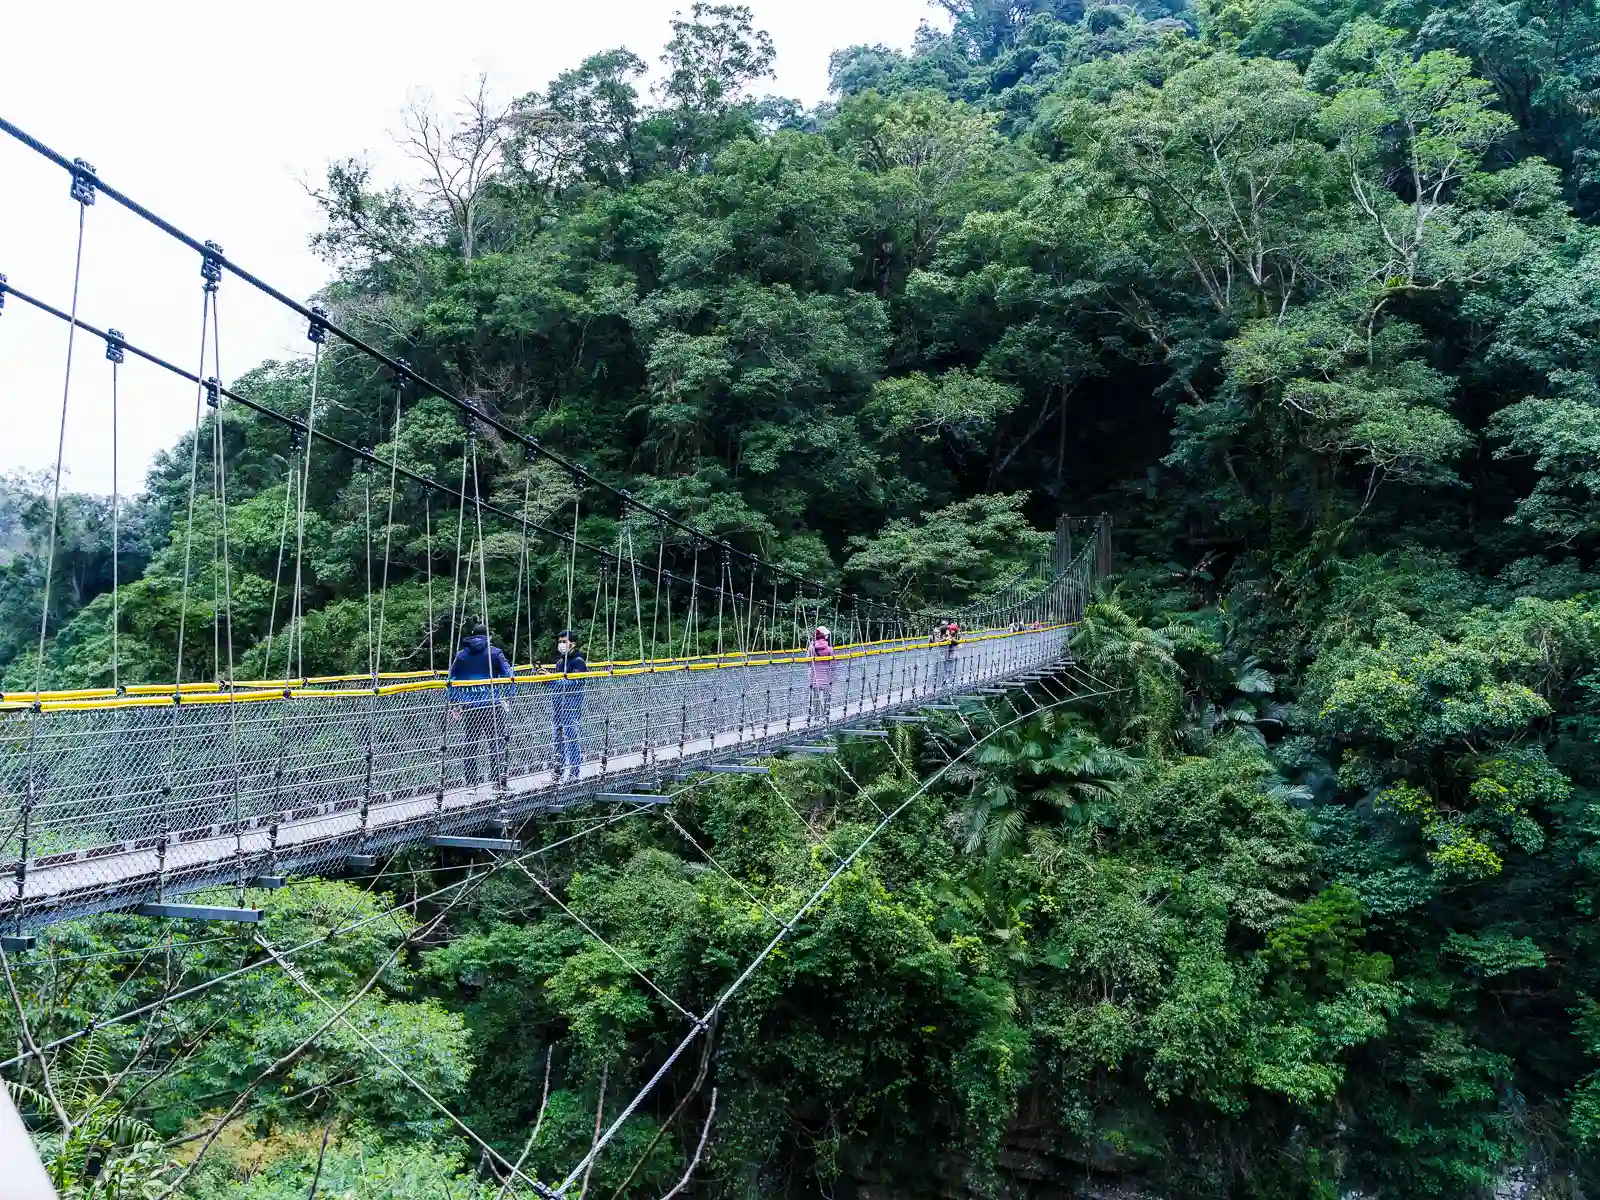 A suspension bridge crosses a valley surrounded by jungle.